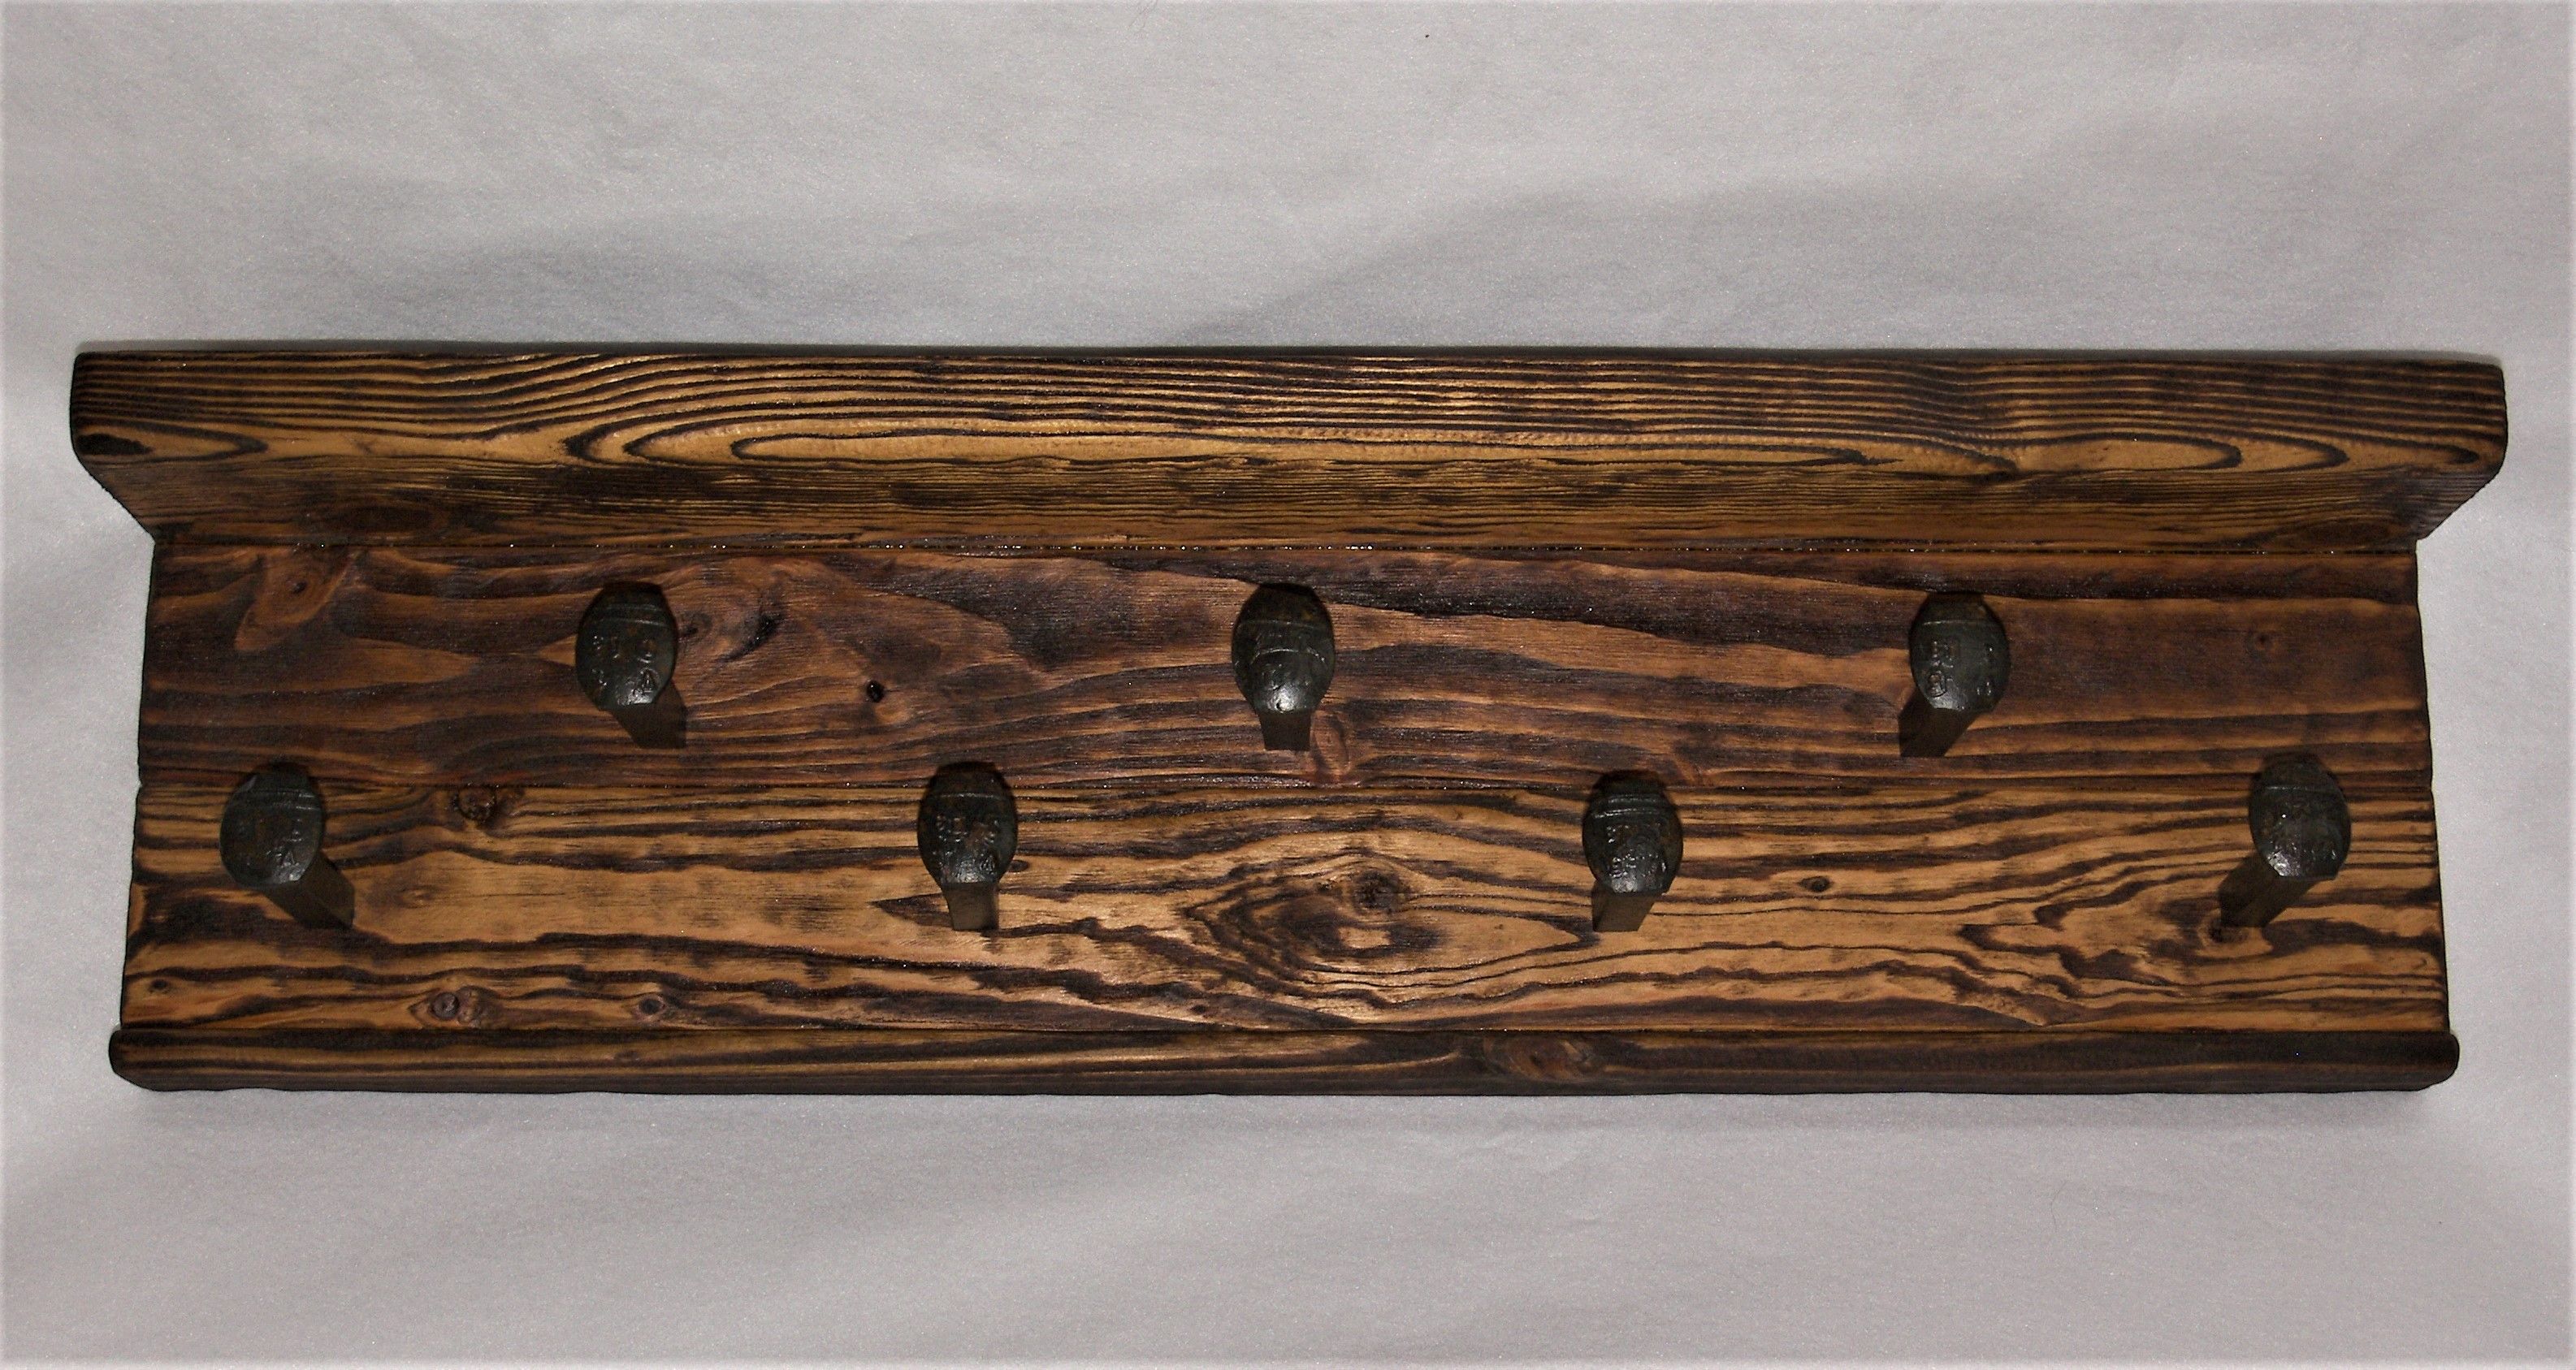 Rustic Coat Rack or Hat Rack made with Reclaimed Wood